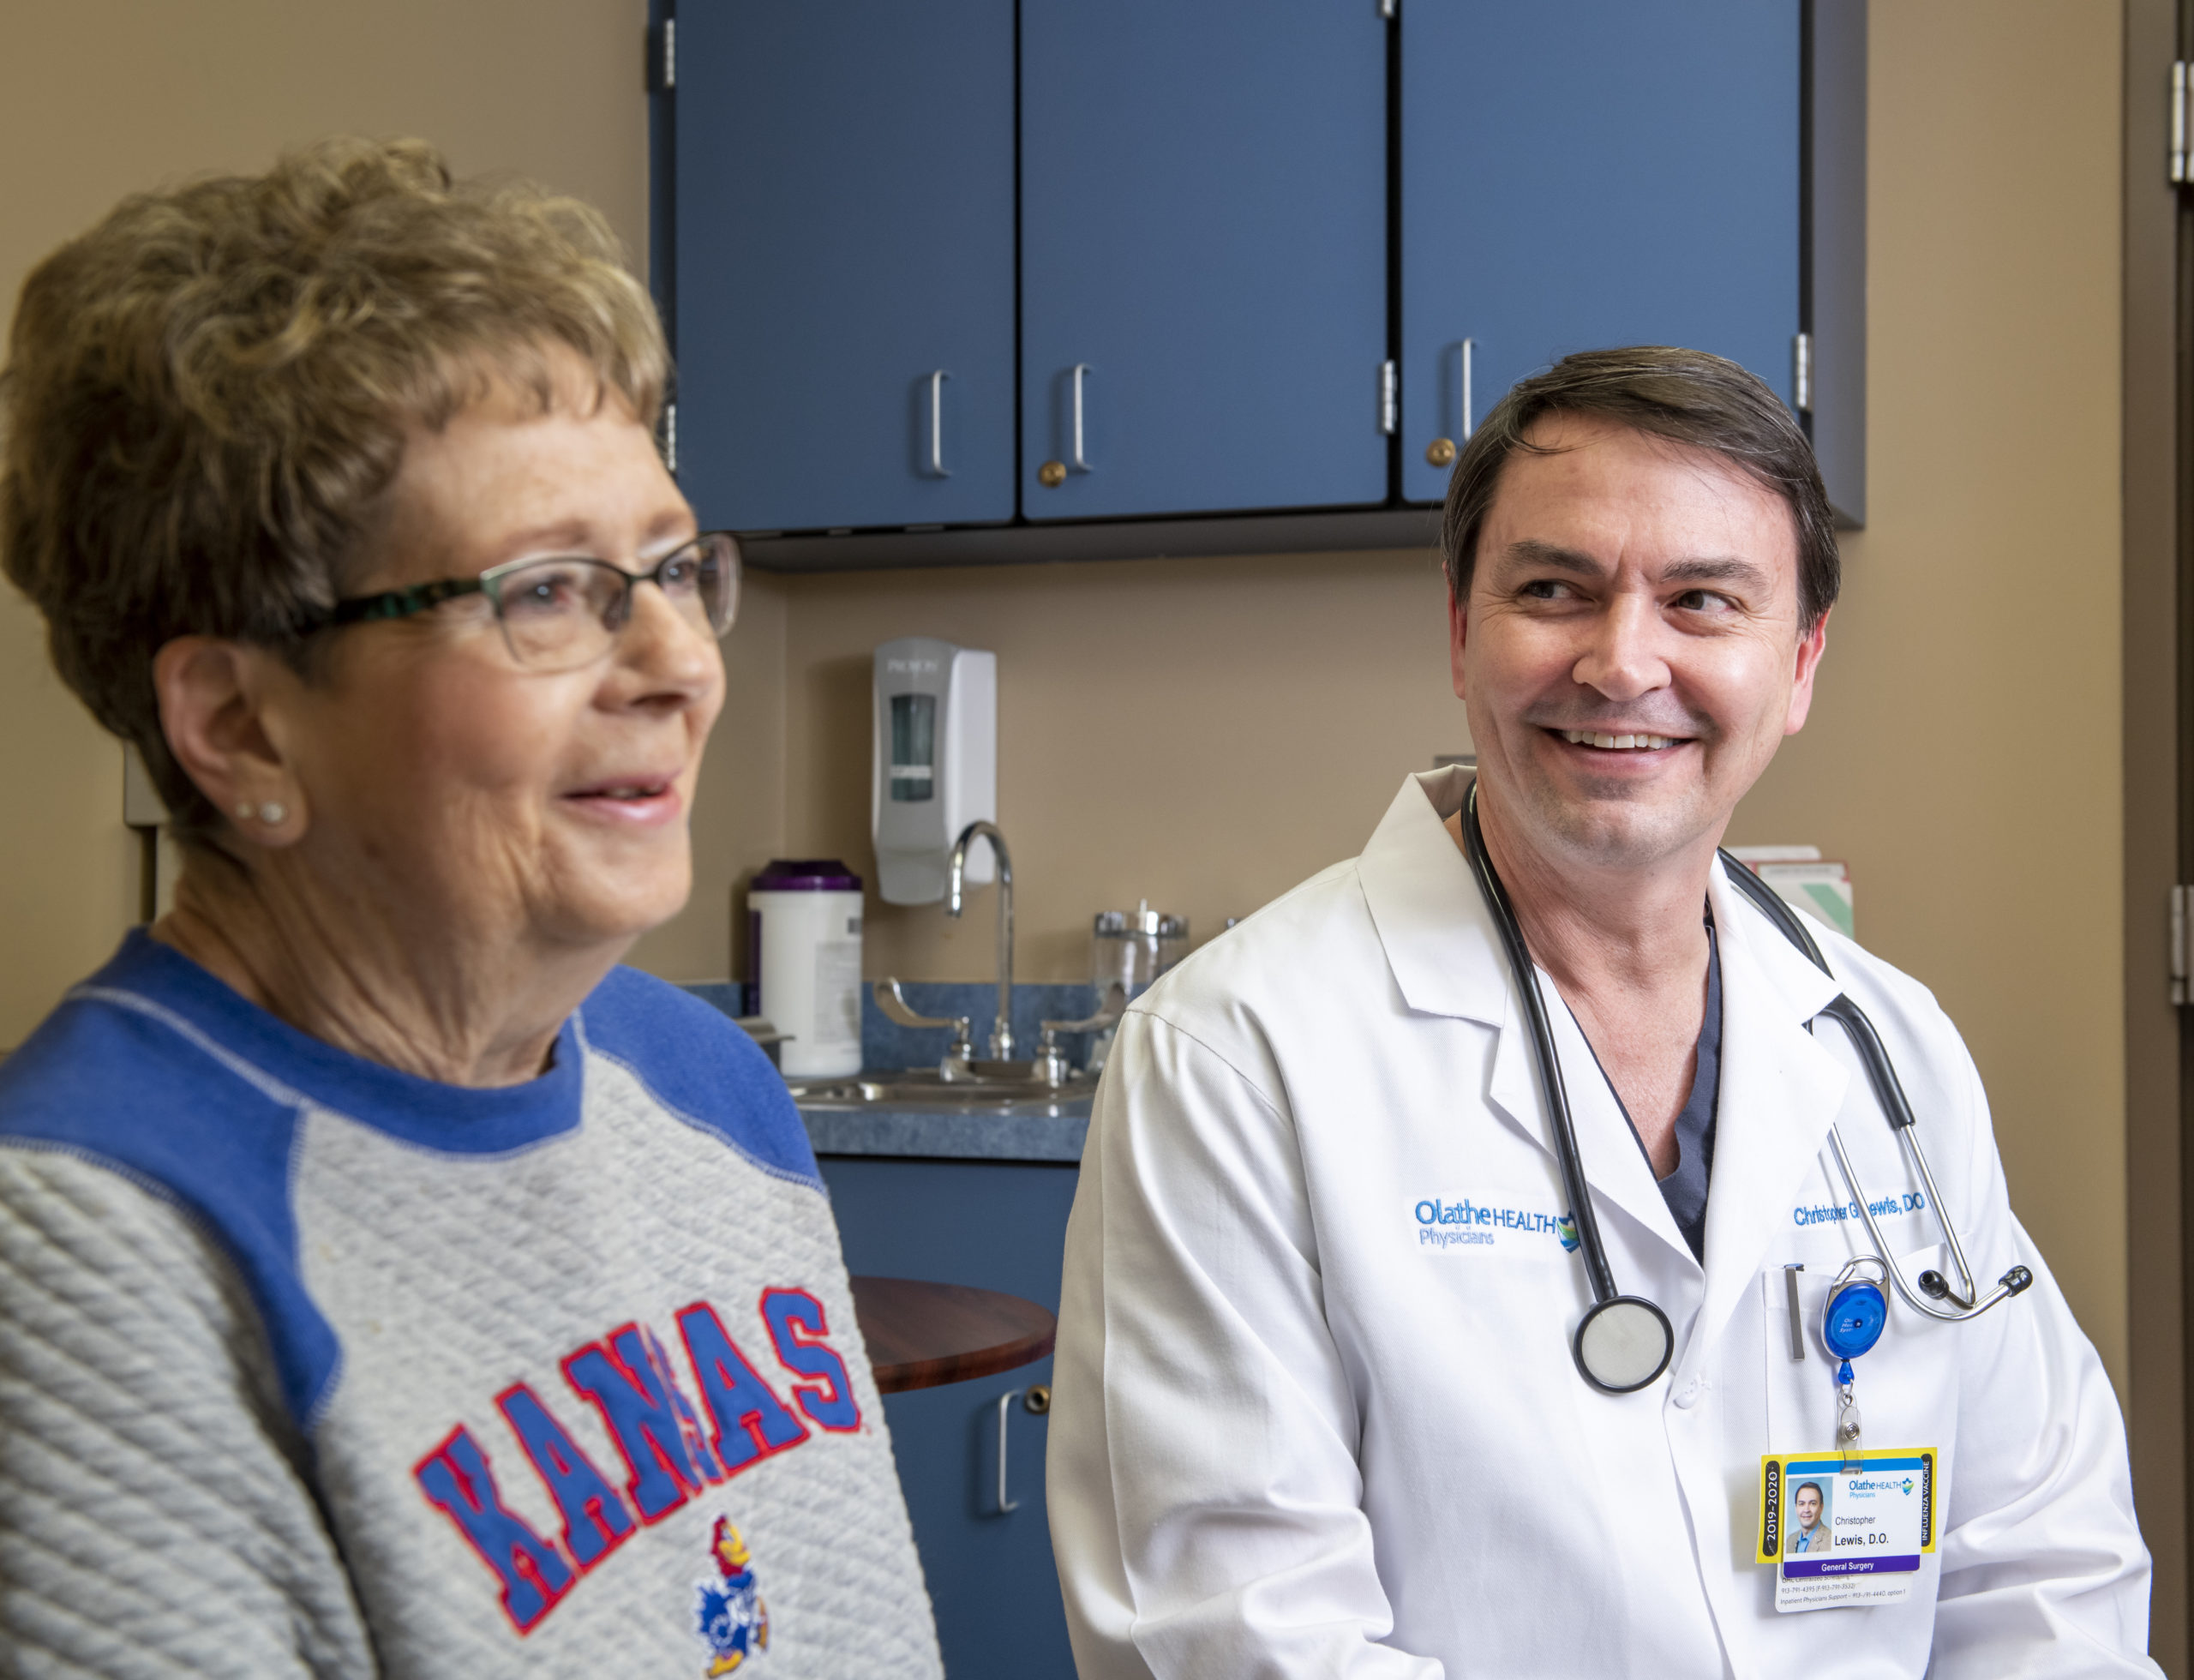 Connecting Care for One Patient Across Doctors, Hospitals and Specialties